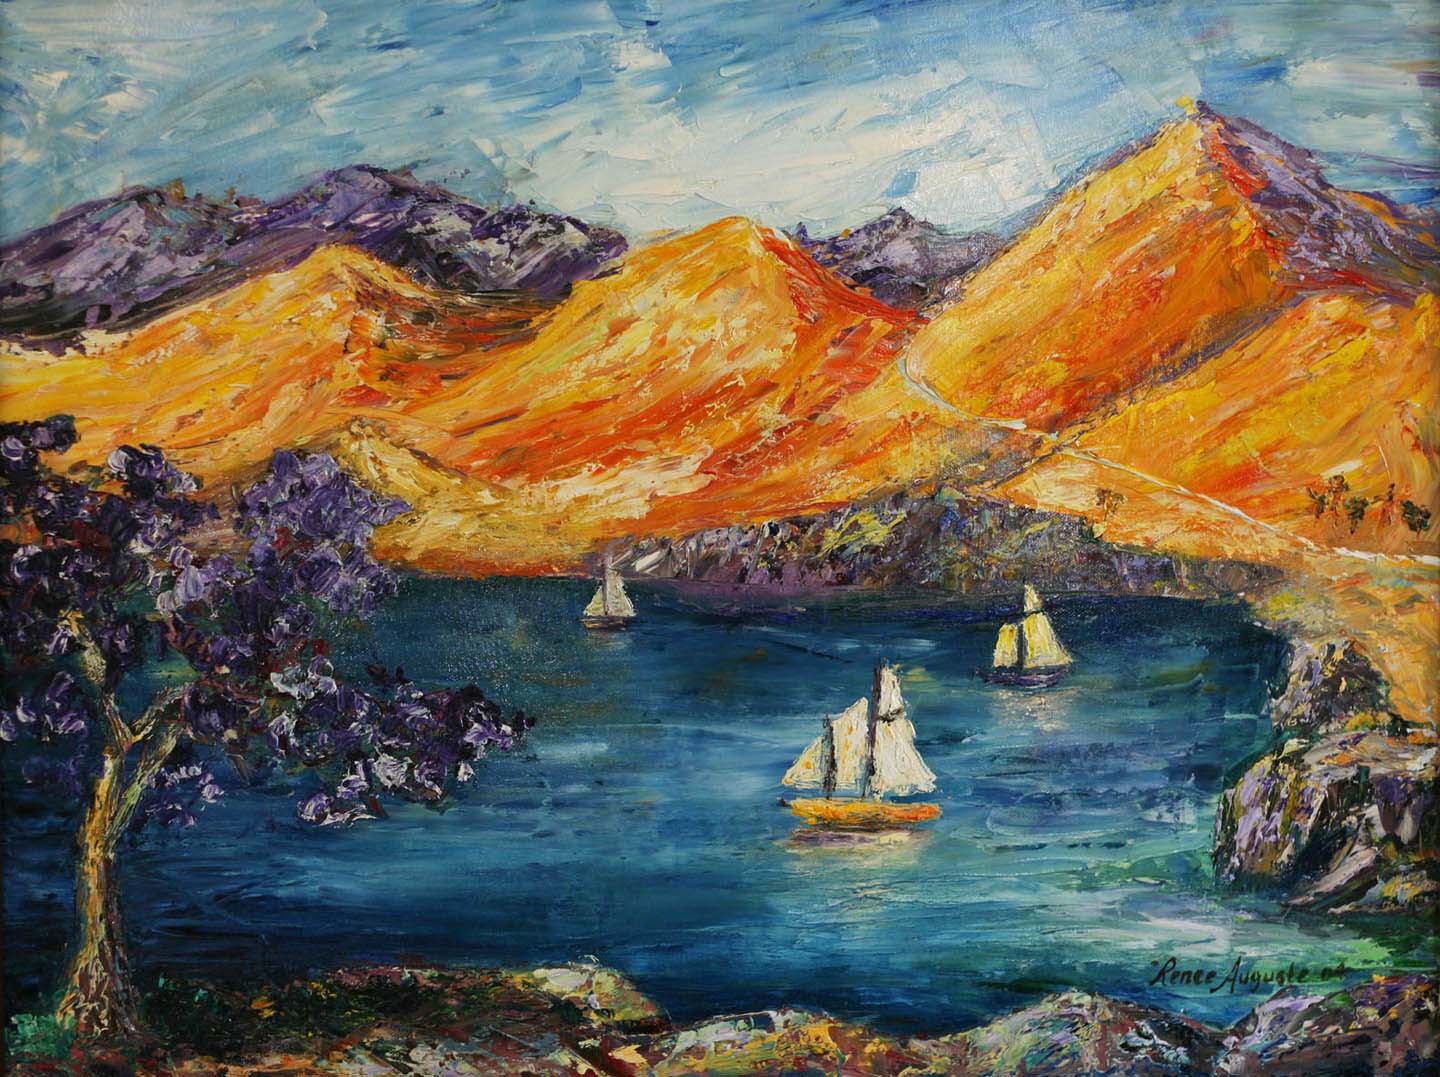 An oil painting of sailboats on a lake with purple trees in the foreground and orange mountains in the background. (This image represents the search query 'Fine art paintings for investment'.)